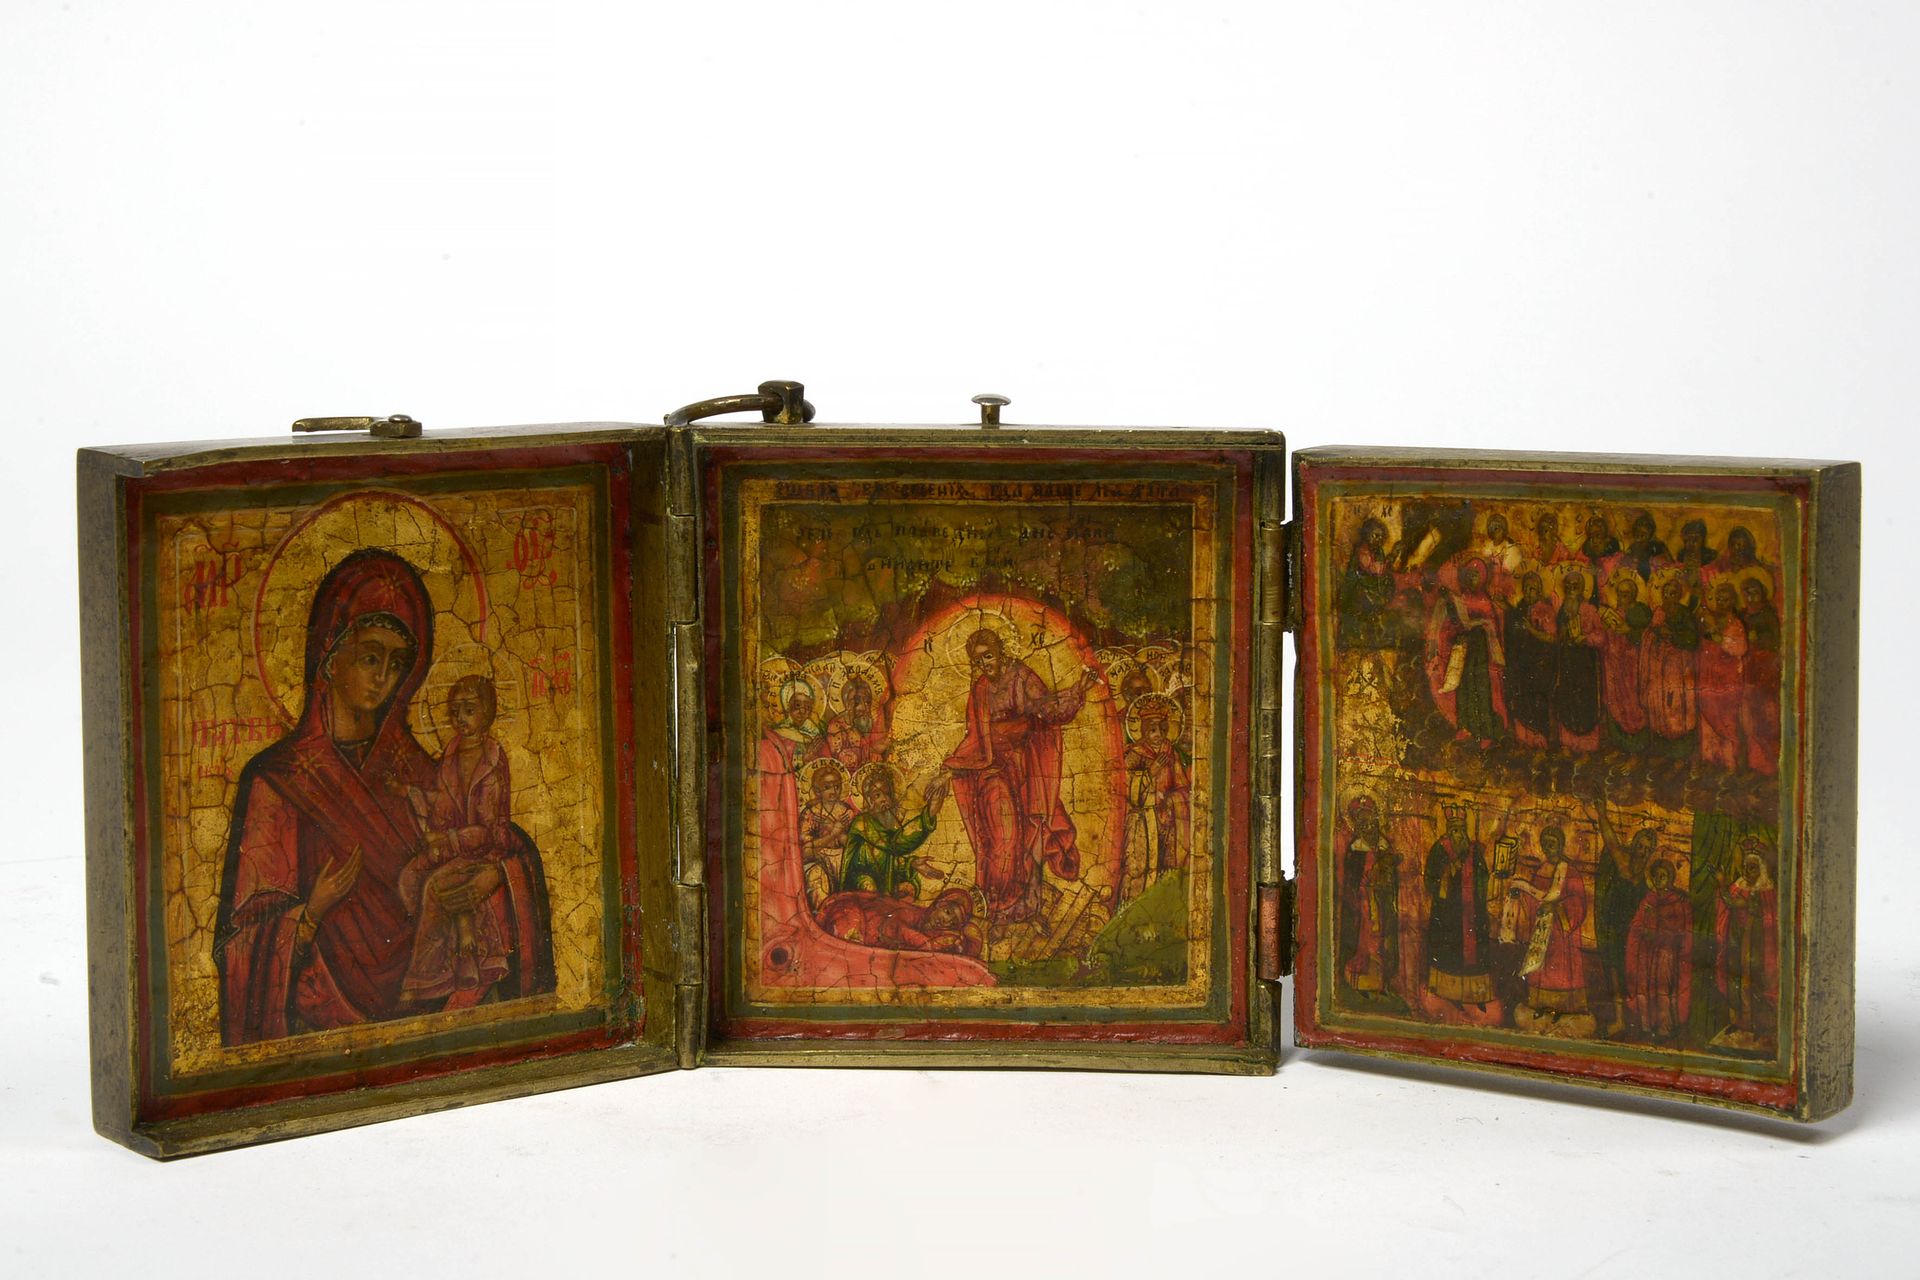 Null Travelling triptych with three small icons representing "Scenes from the Li&hellip;